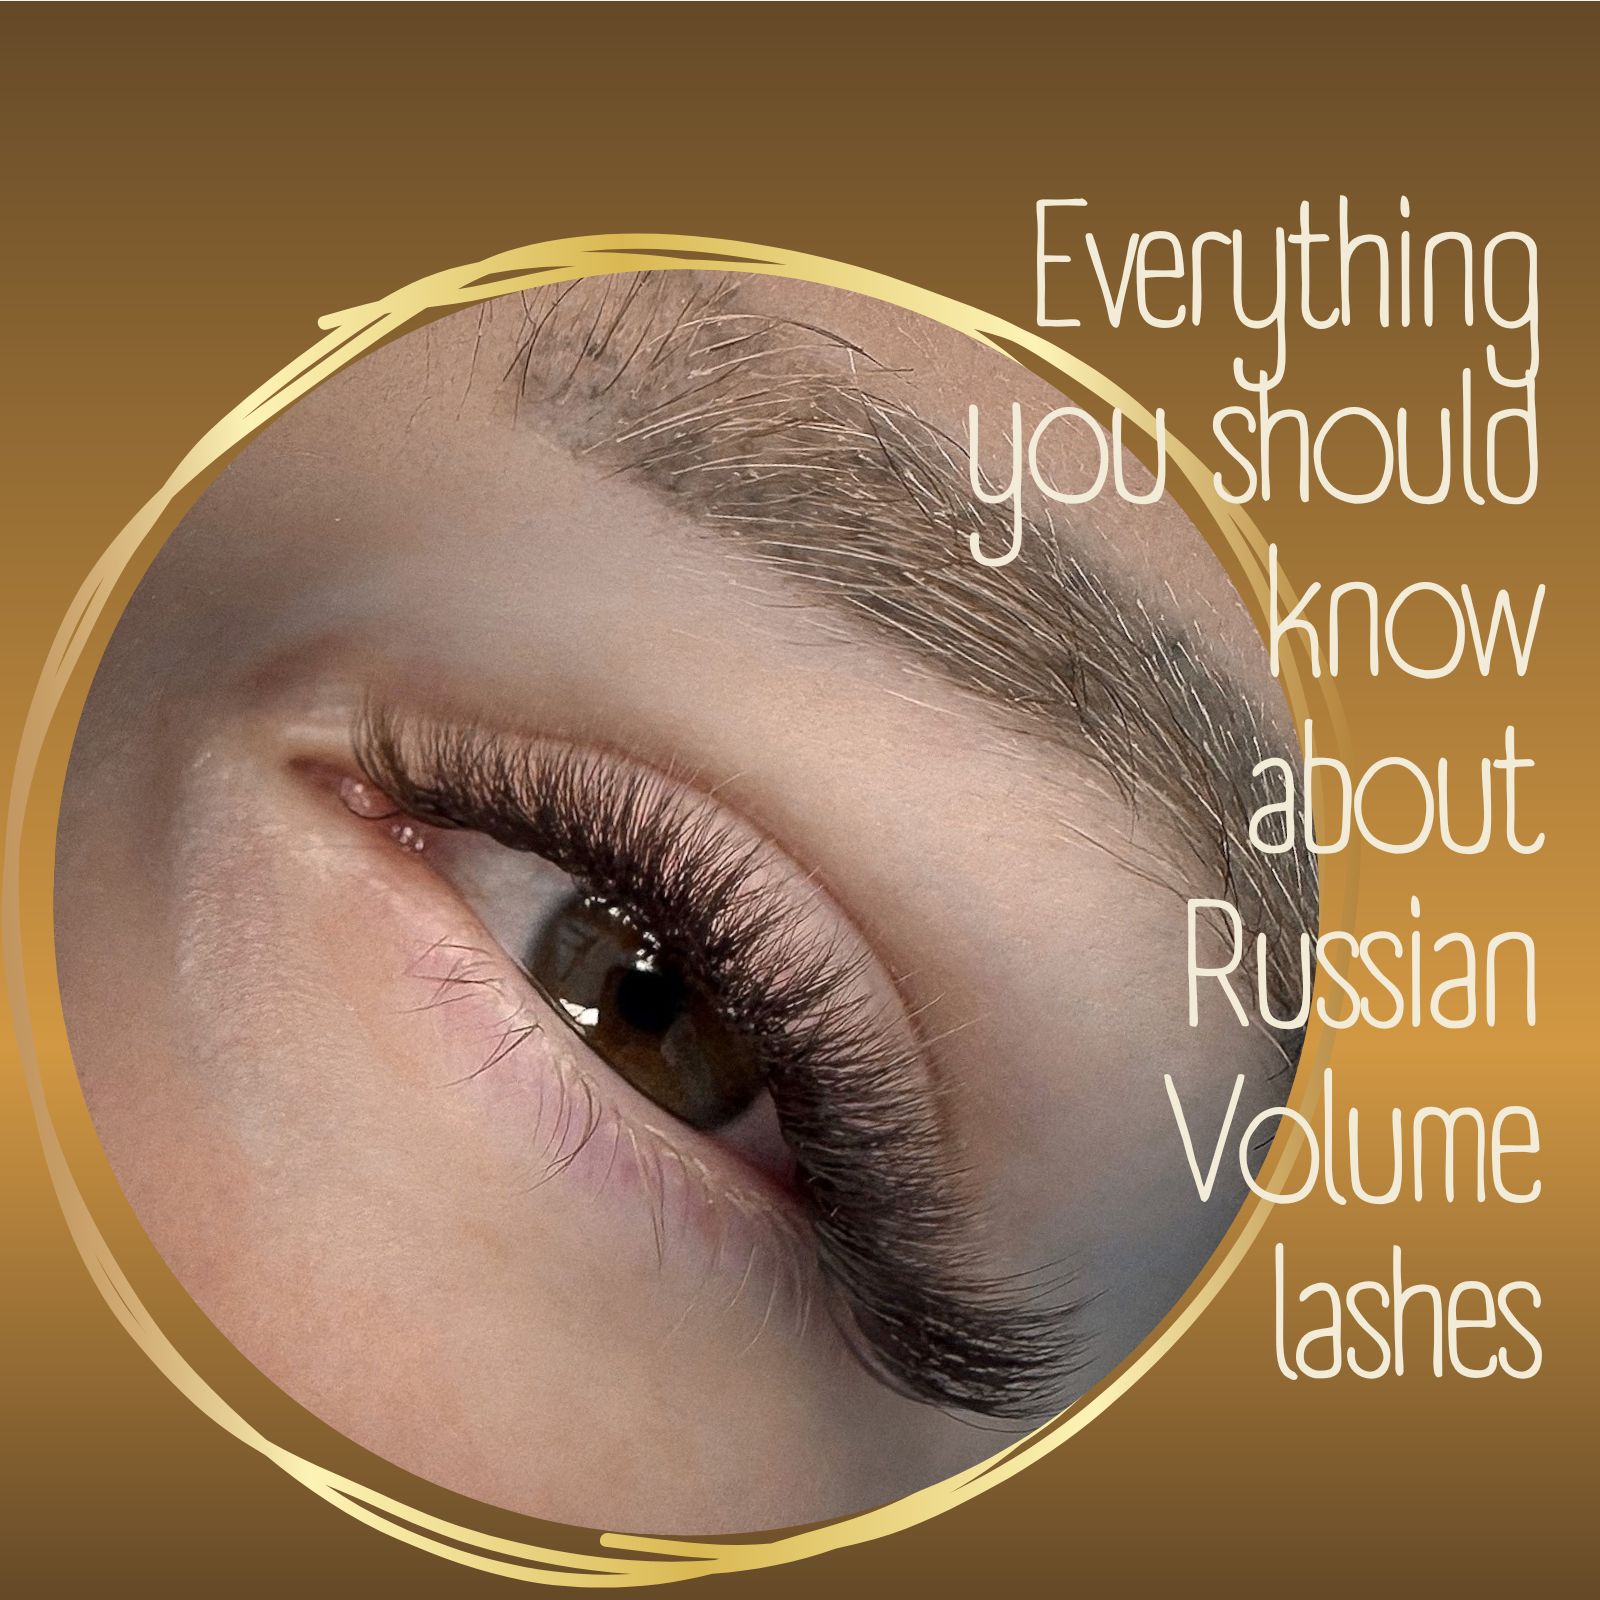 Everything you should know about Russian Volume lashes